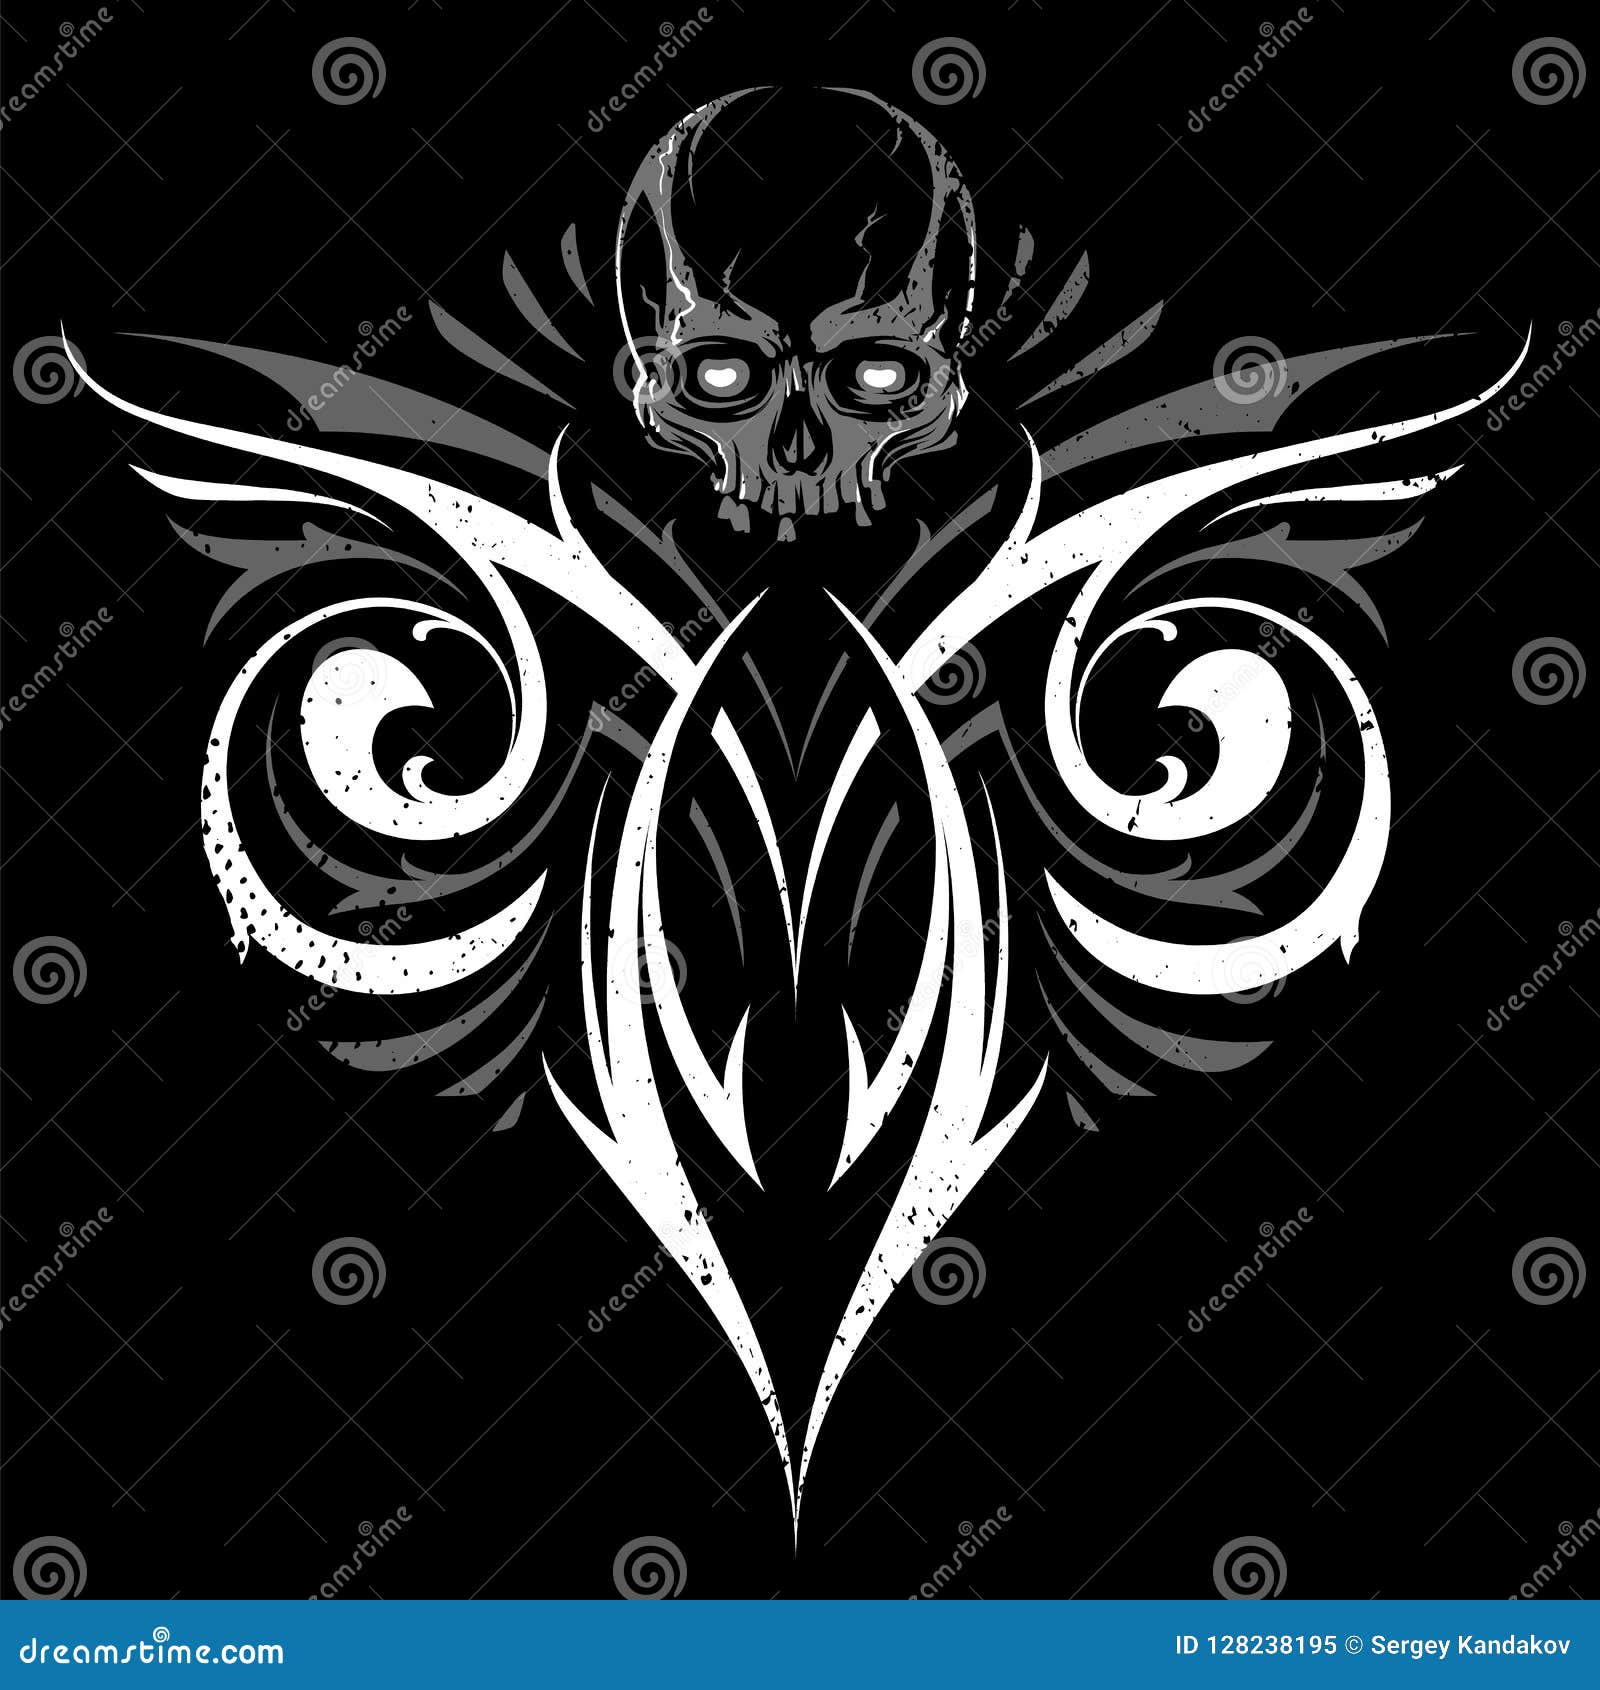 Gothic Abstract Ornament with Skull Stock Vector - Illustration of ...